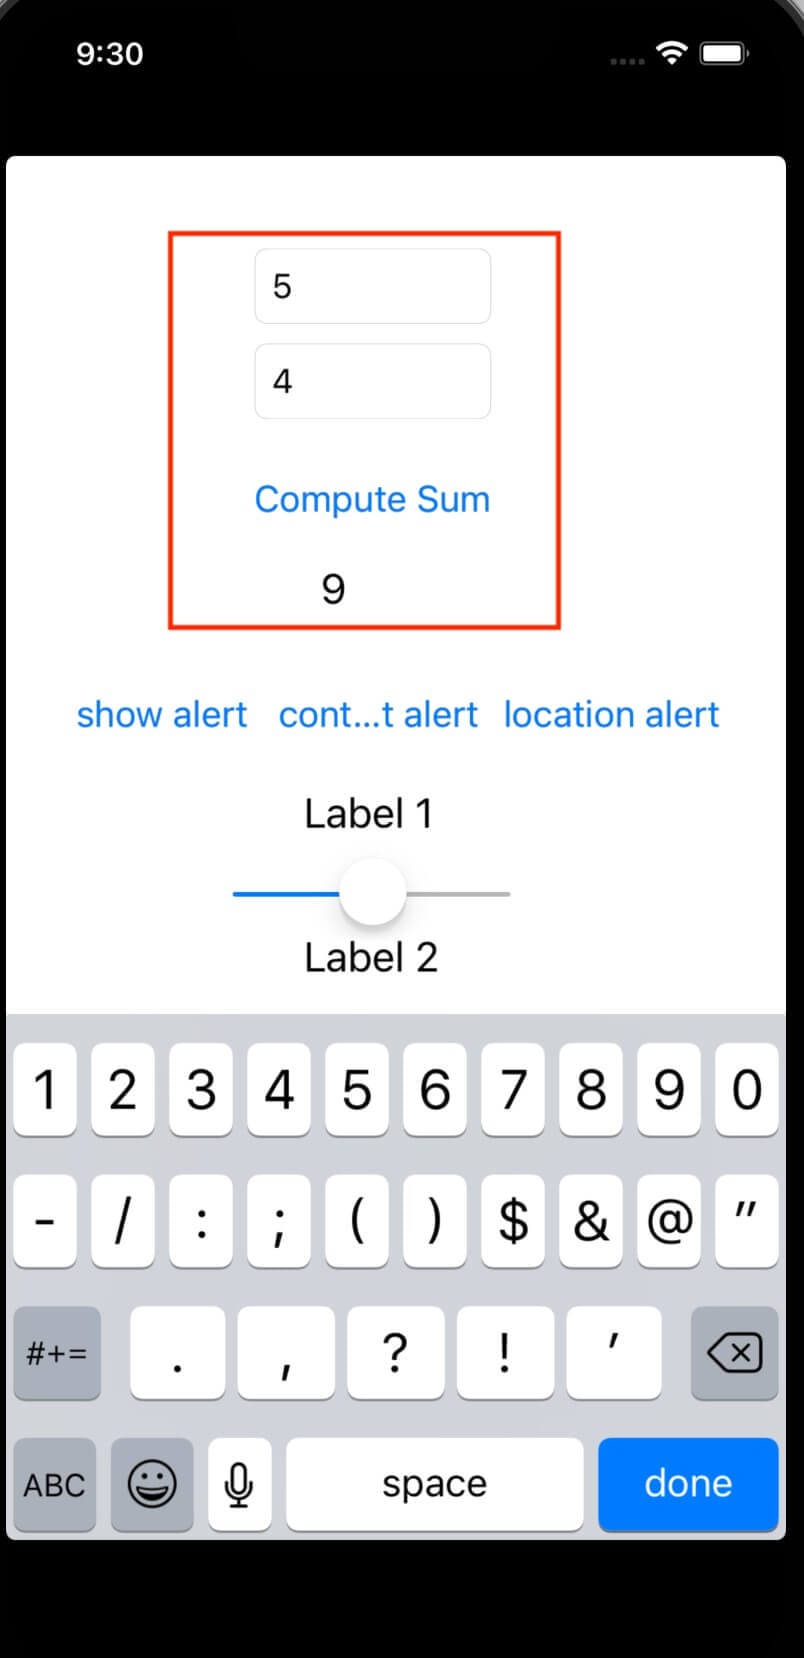 TestApp from appium showing two text buttons, a compute sum button and a result textbox